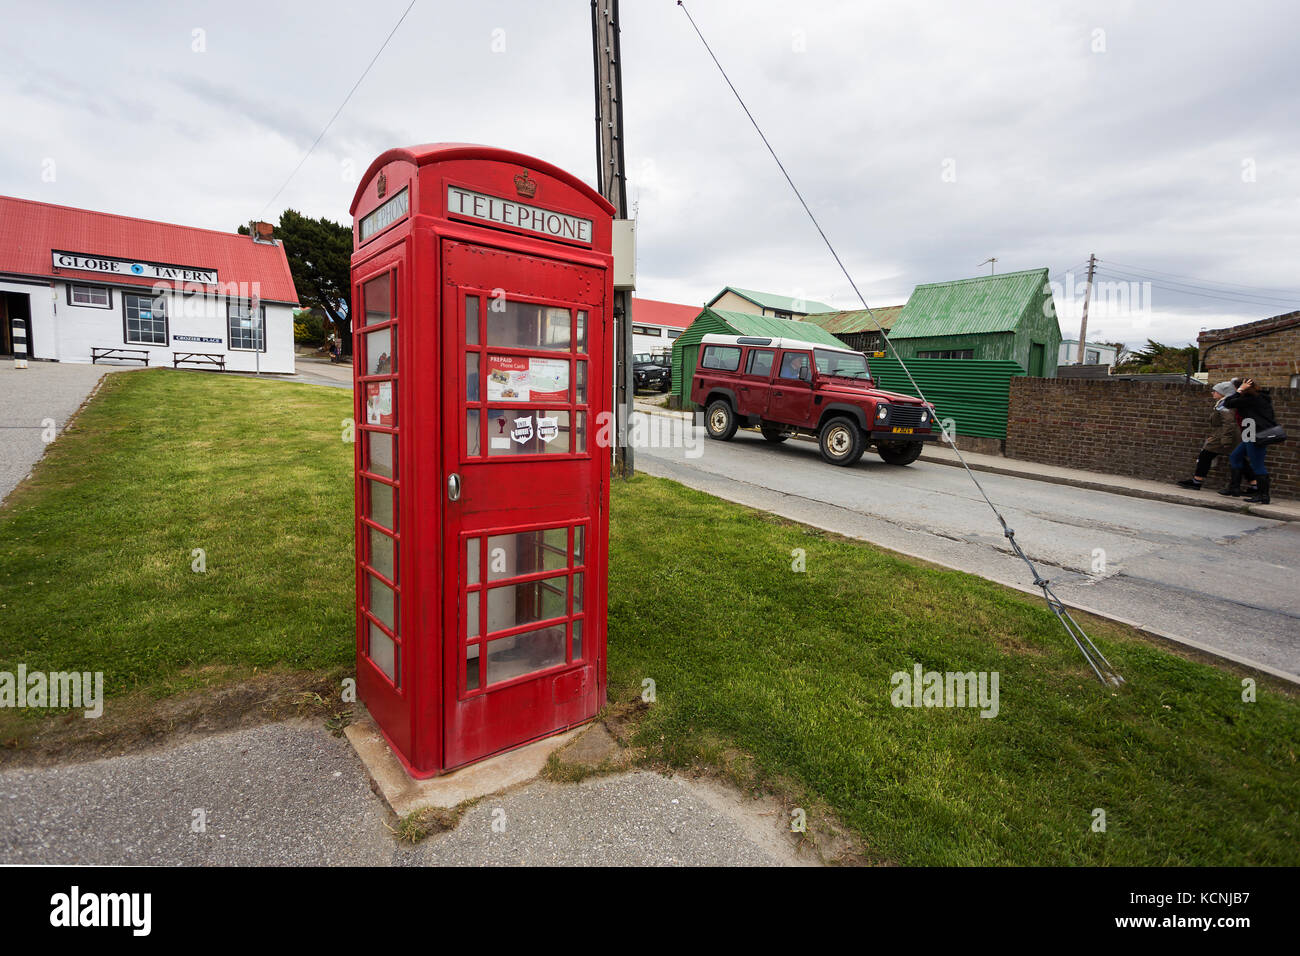 The town of Stanley, capital of the Falkland Islands maintains a sense of british heritage with its telephone booths and taverns in this remote area of the planet.  Falkland Islands Stock Photo